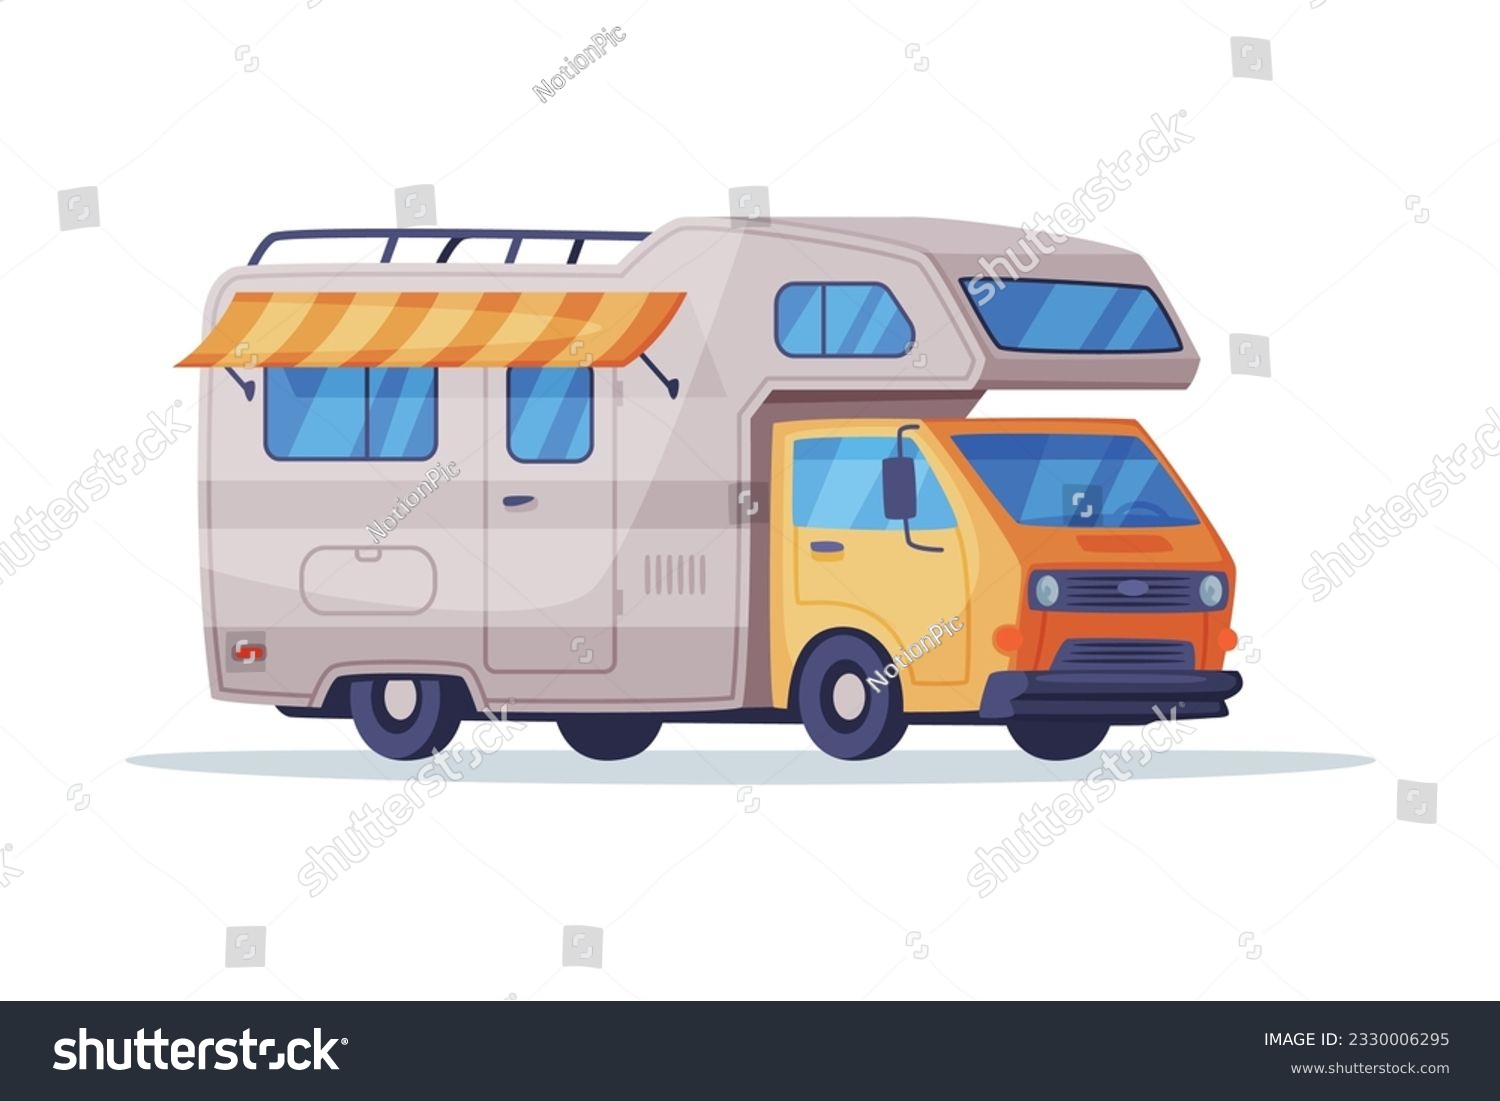 SVG of Camping trailer truck with awning. Recreational vehicle van, mobile home on wheels vector illustration svg